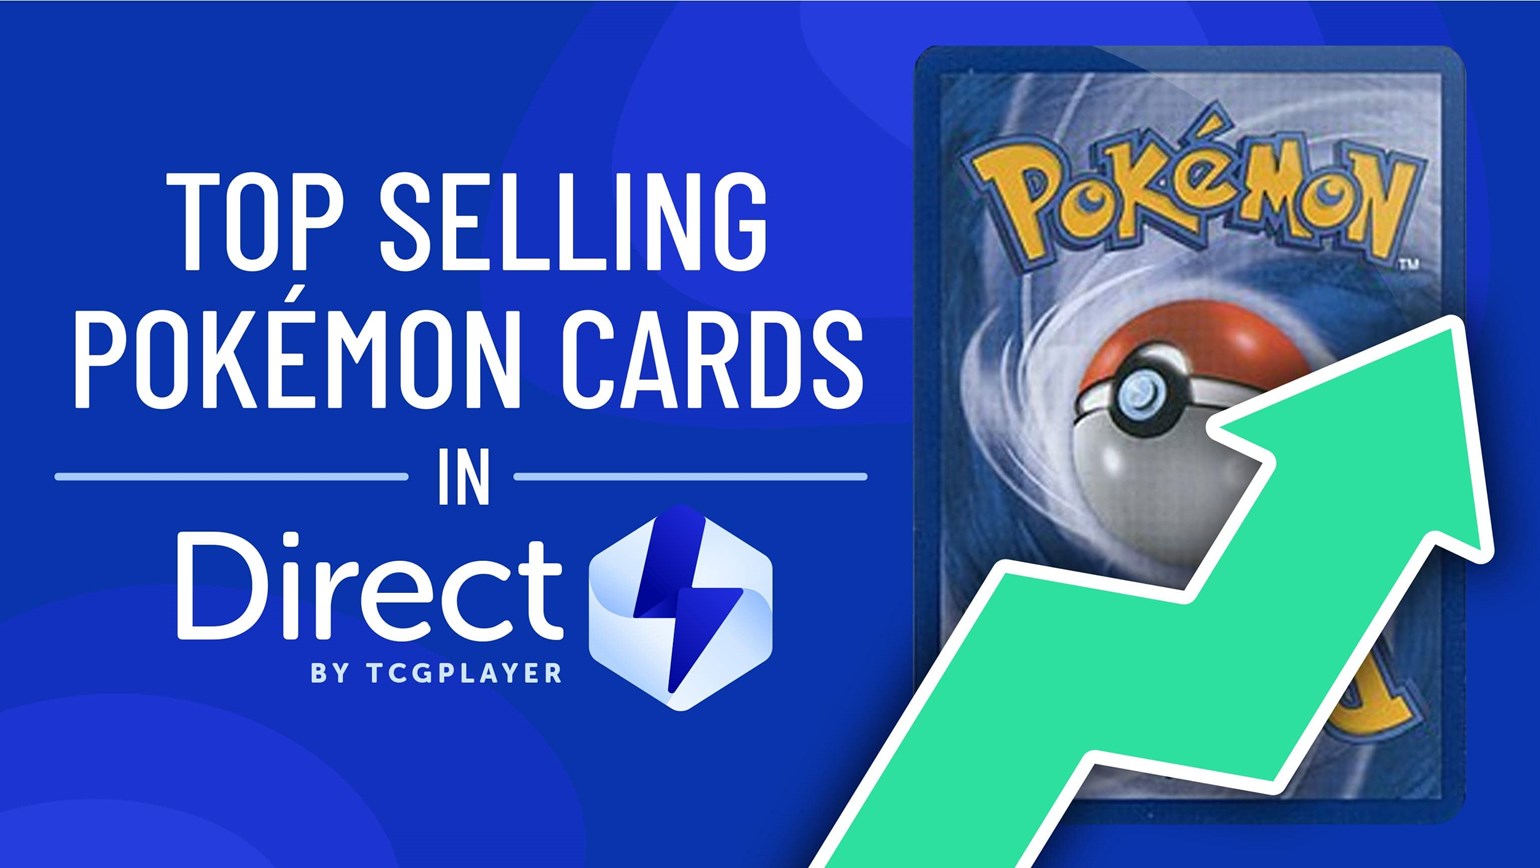 December Top Selling Pokémon Cards Under $25 in Direct by TCGplayer